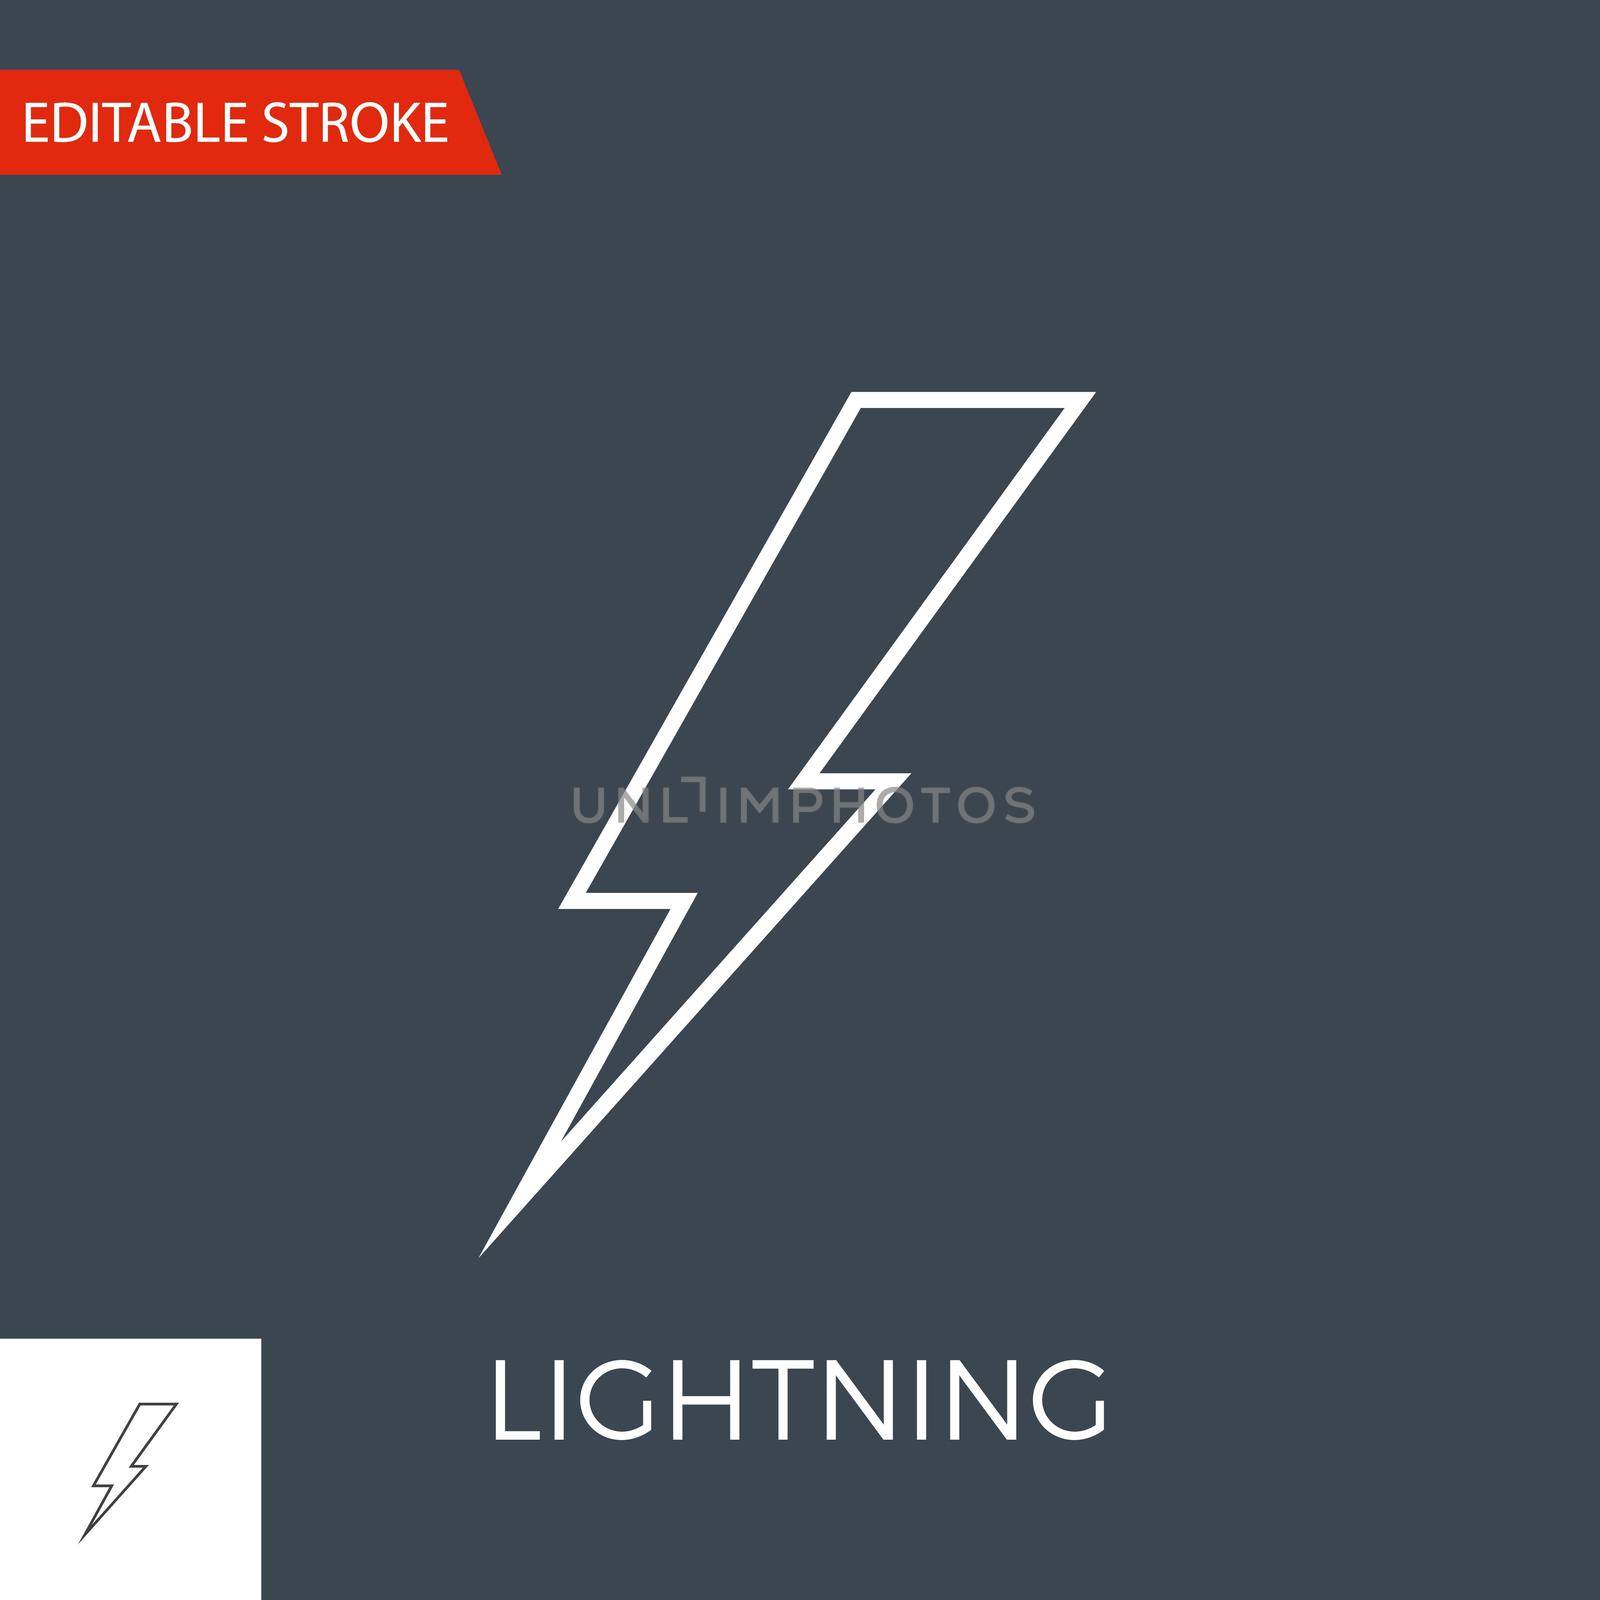 Lightning Vector Icon. Thin Line Vector Illustration. Adjust stroke weight - Expand to any Size - Easy Change Colour - Editable Stroke